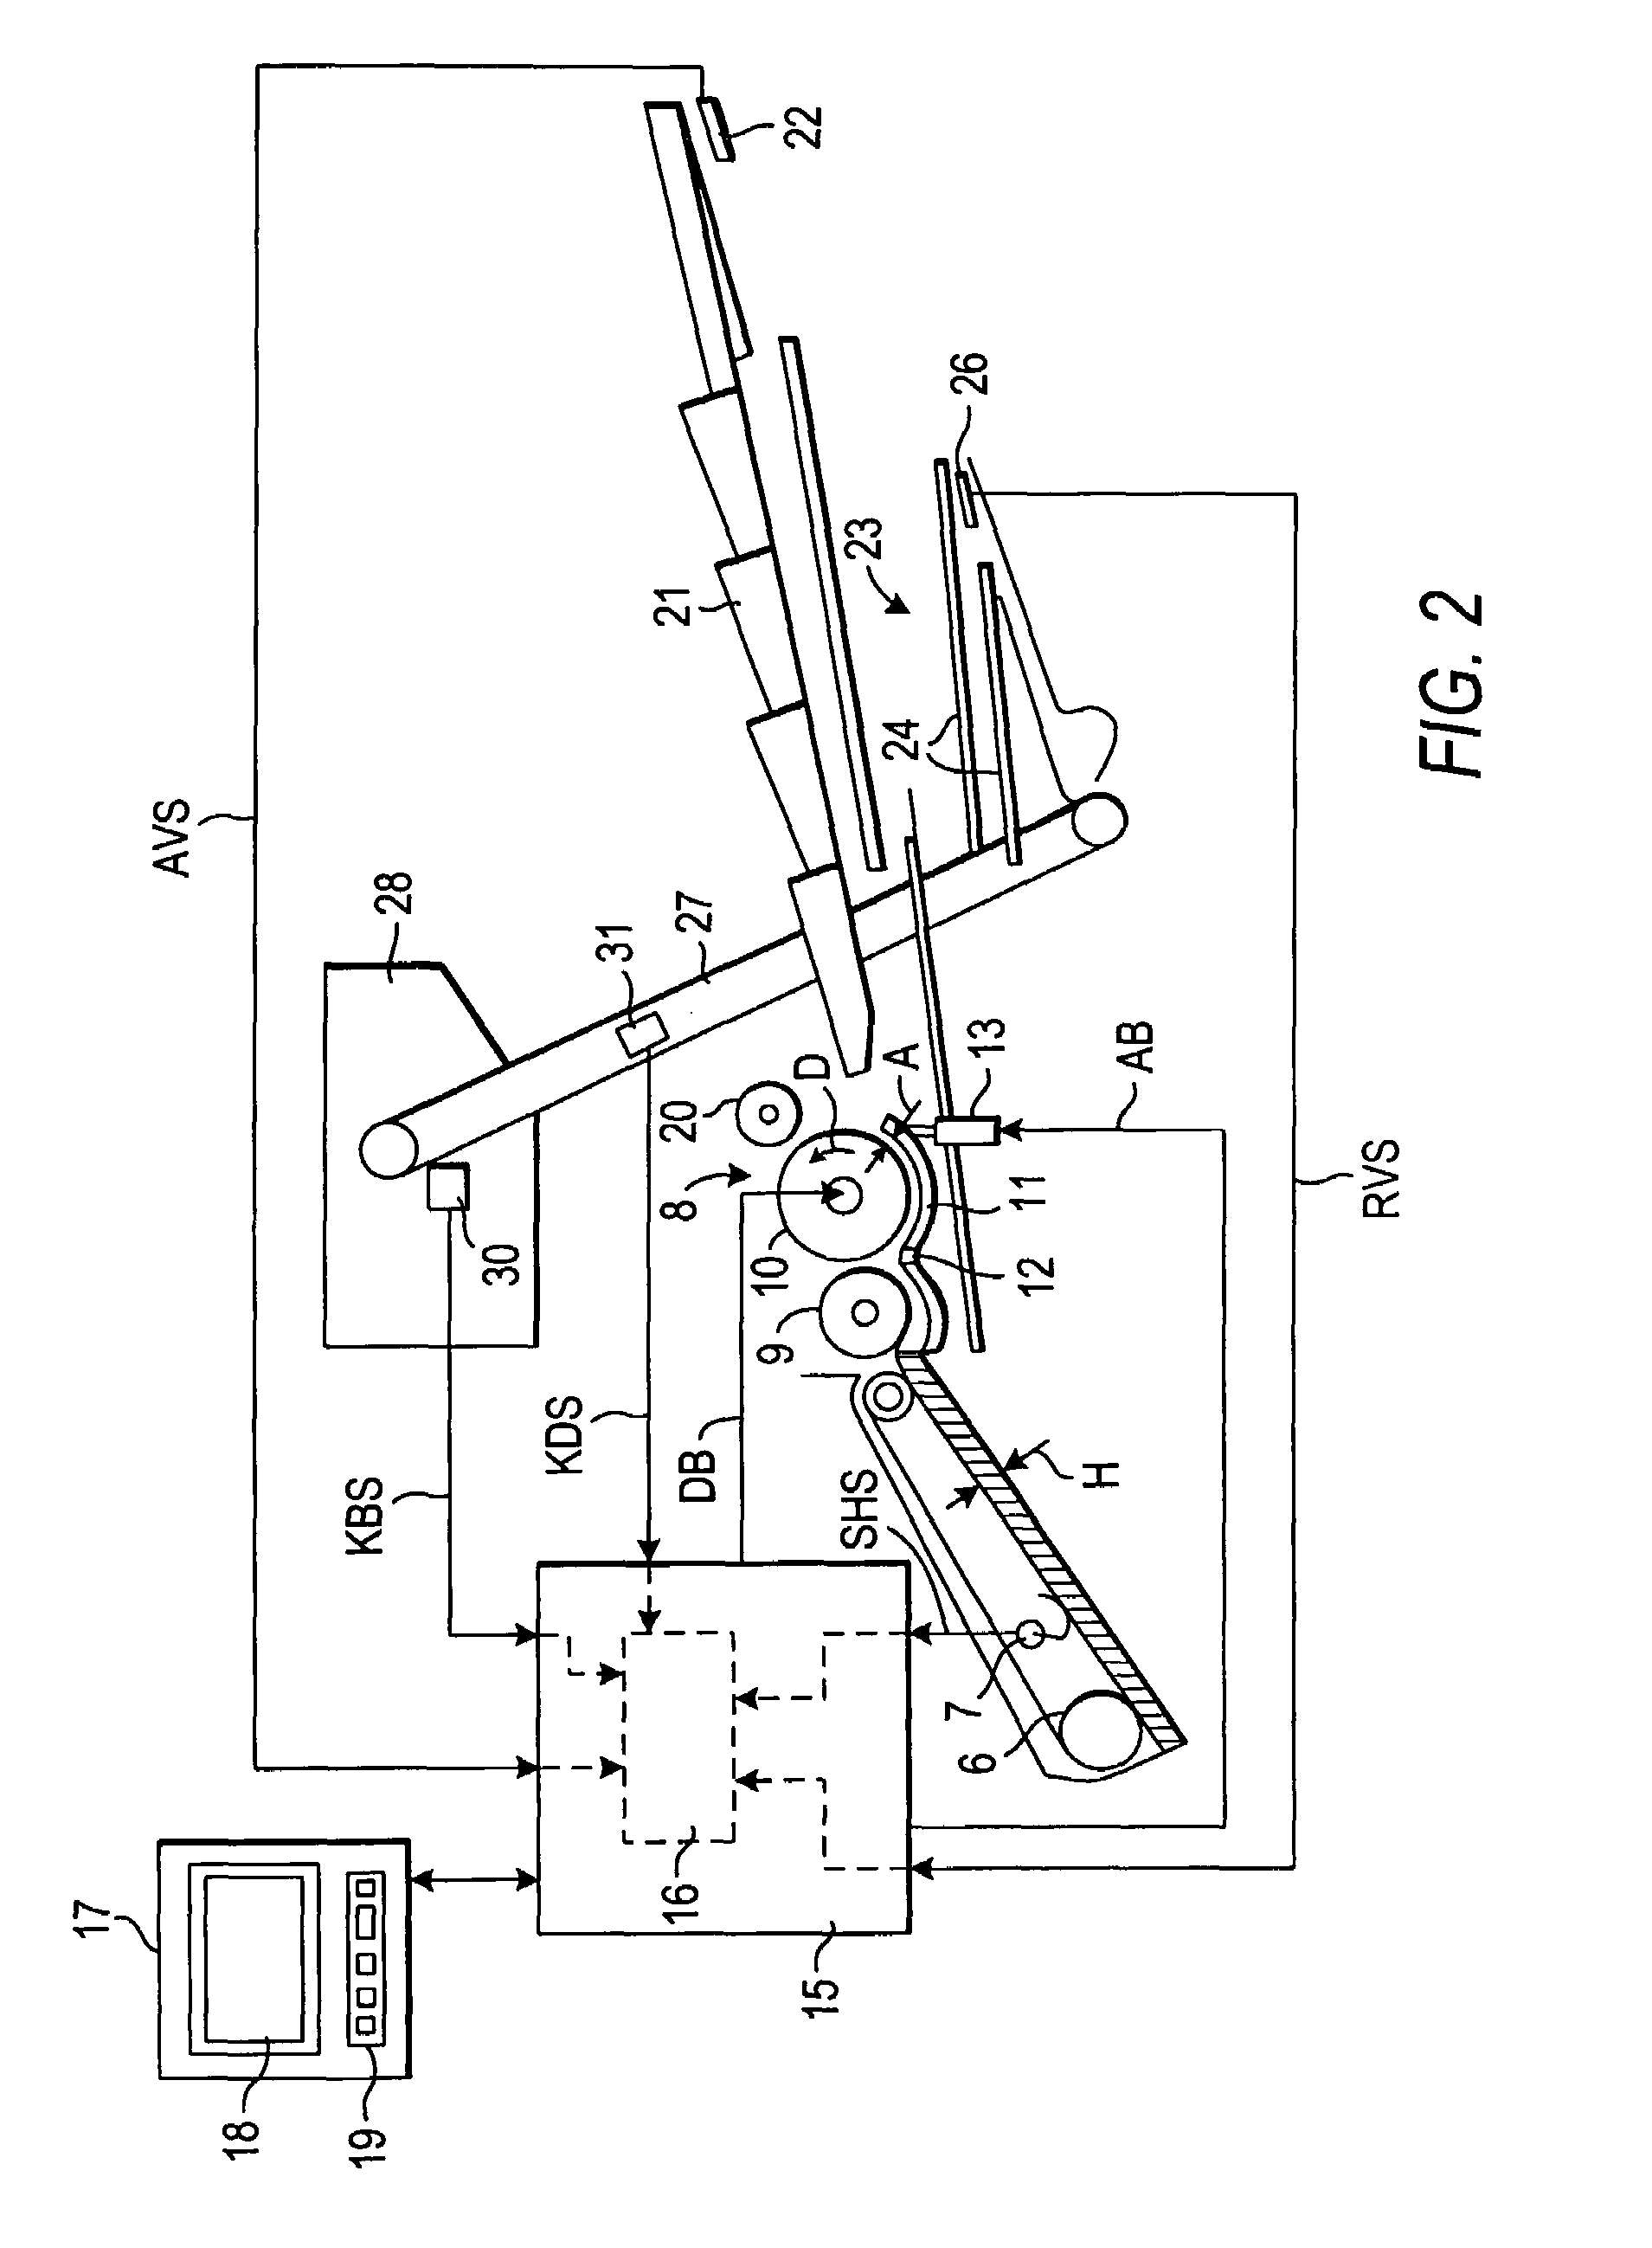 Method of controlling a threshing mechanism of a combine harvester